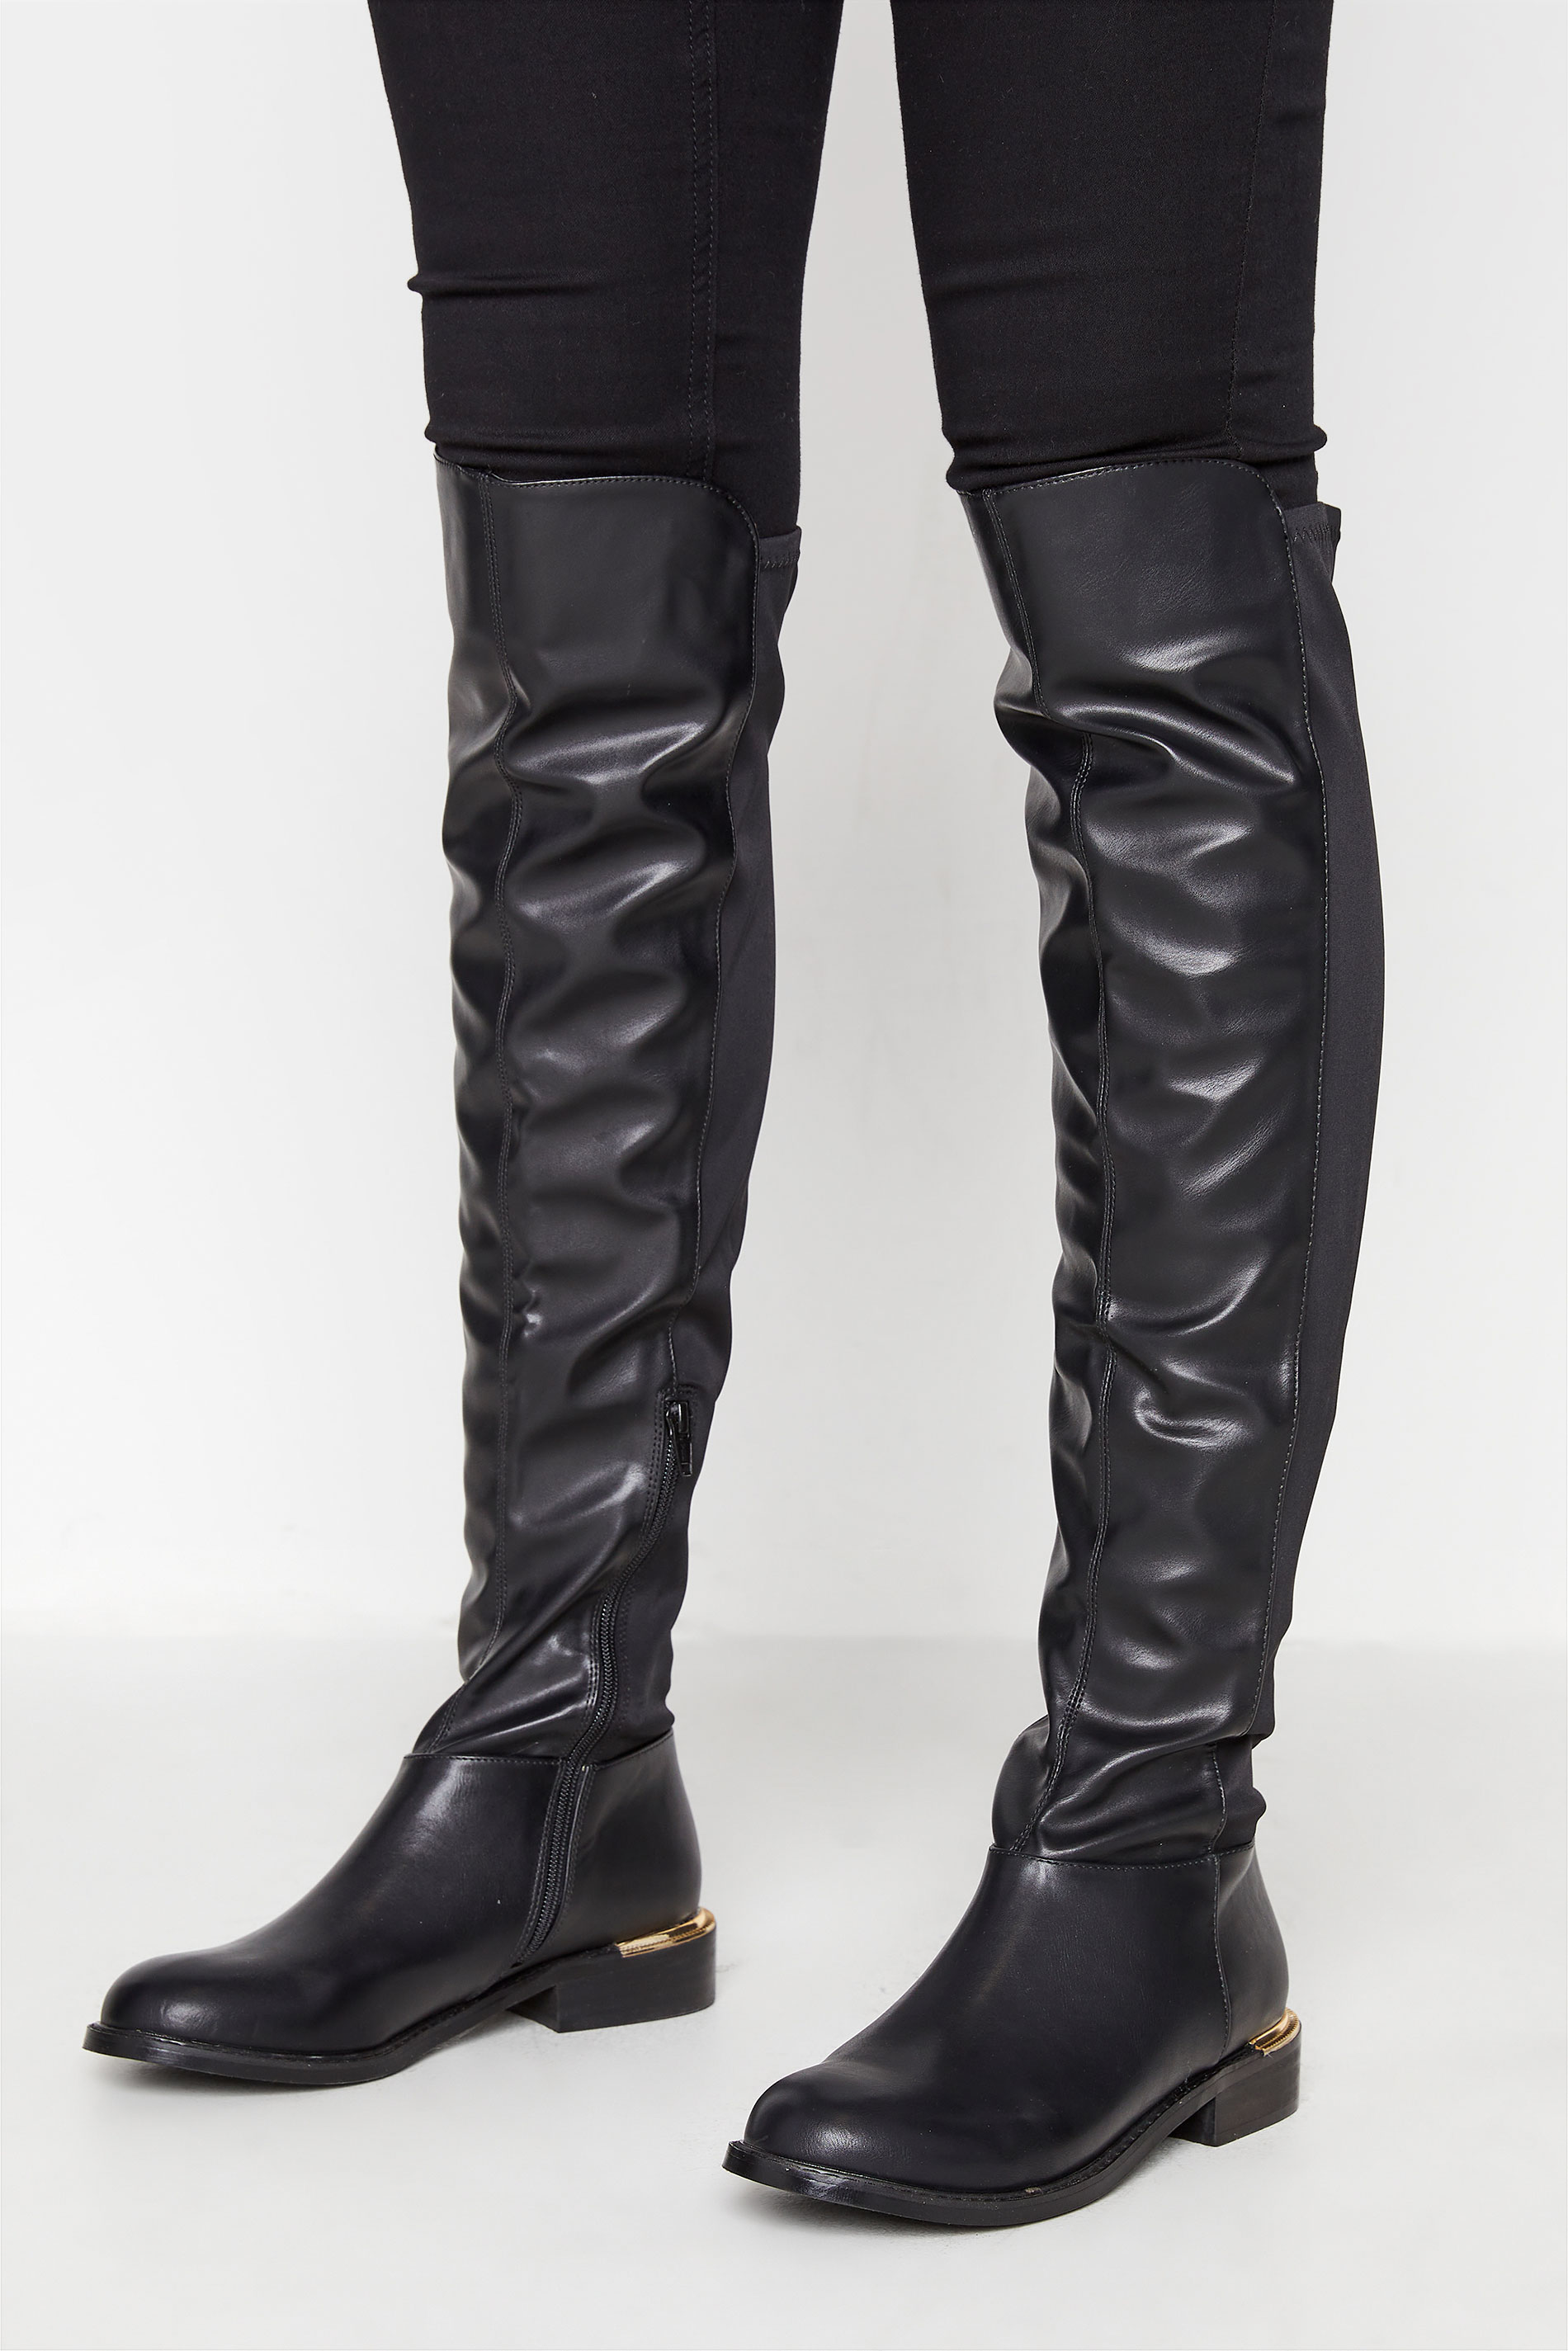 LTS Black Faux Leather Over The Knee Stretch Boots In Standard D Fit | Long Tall Sally 2